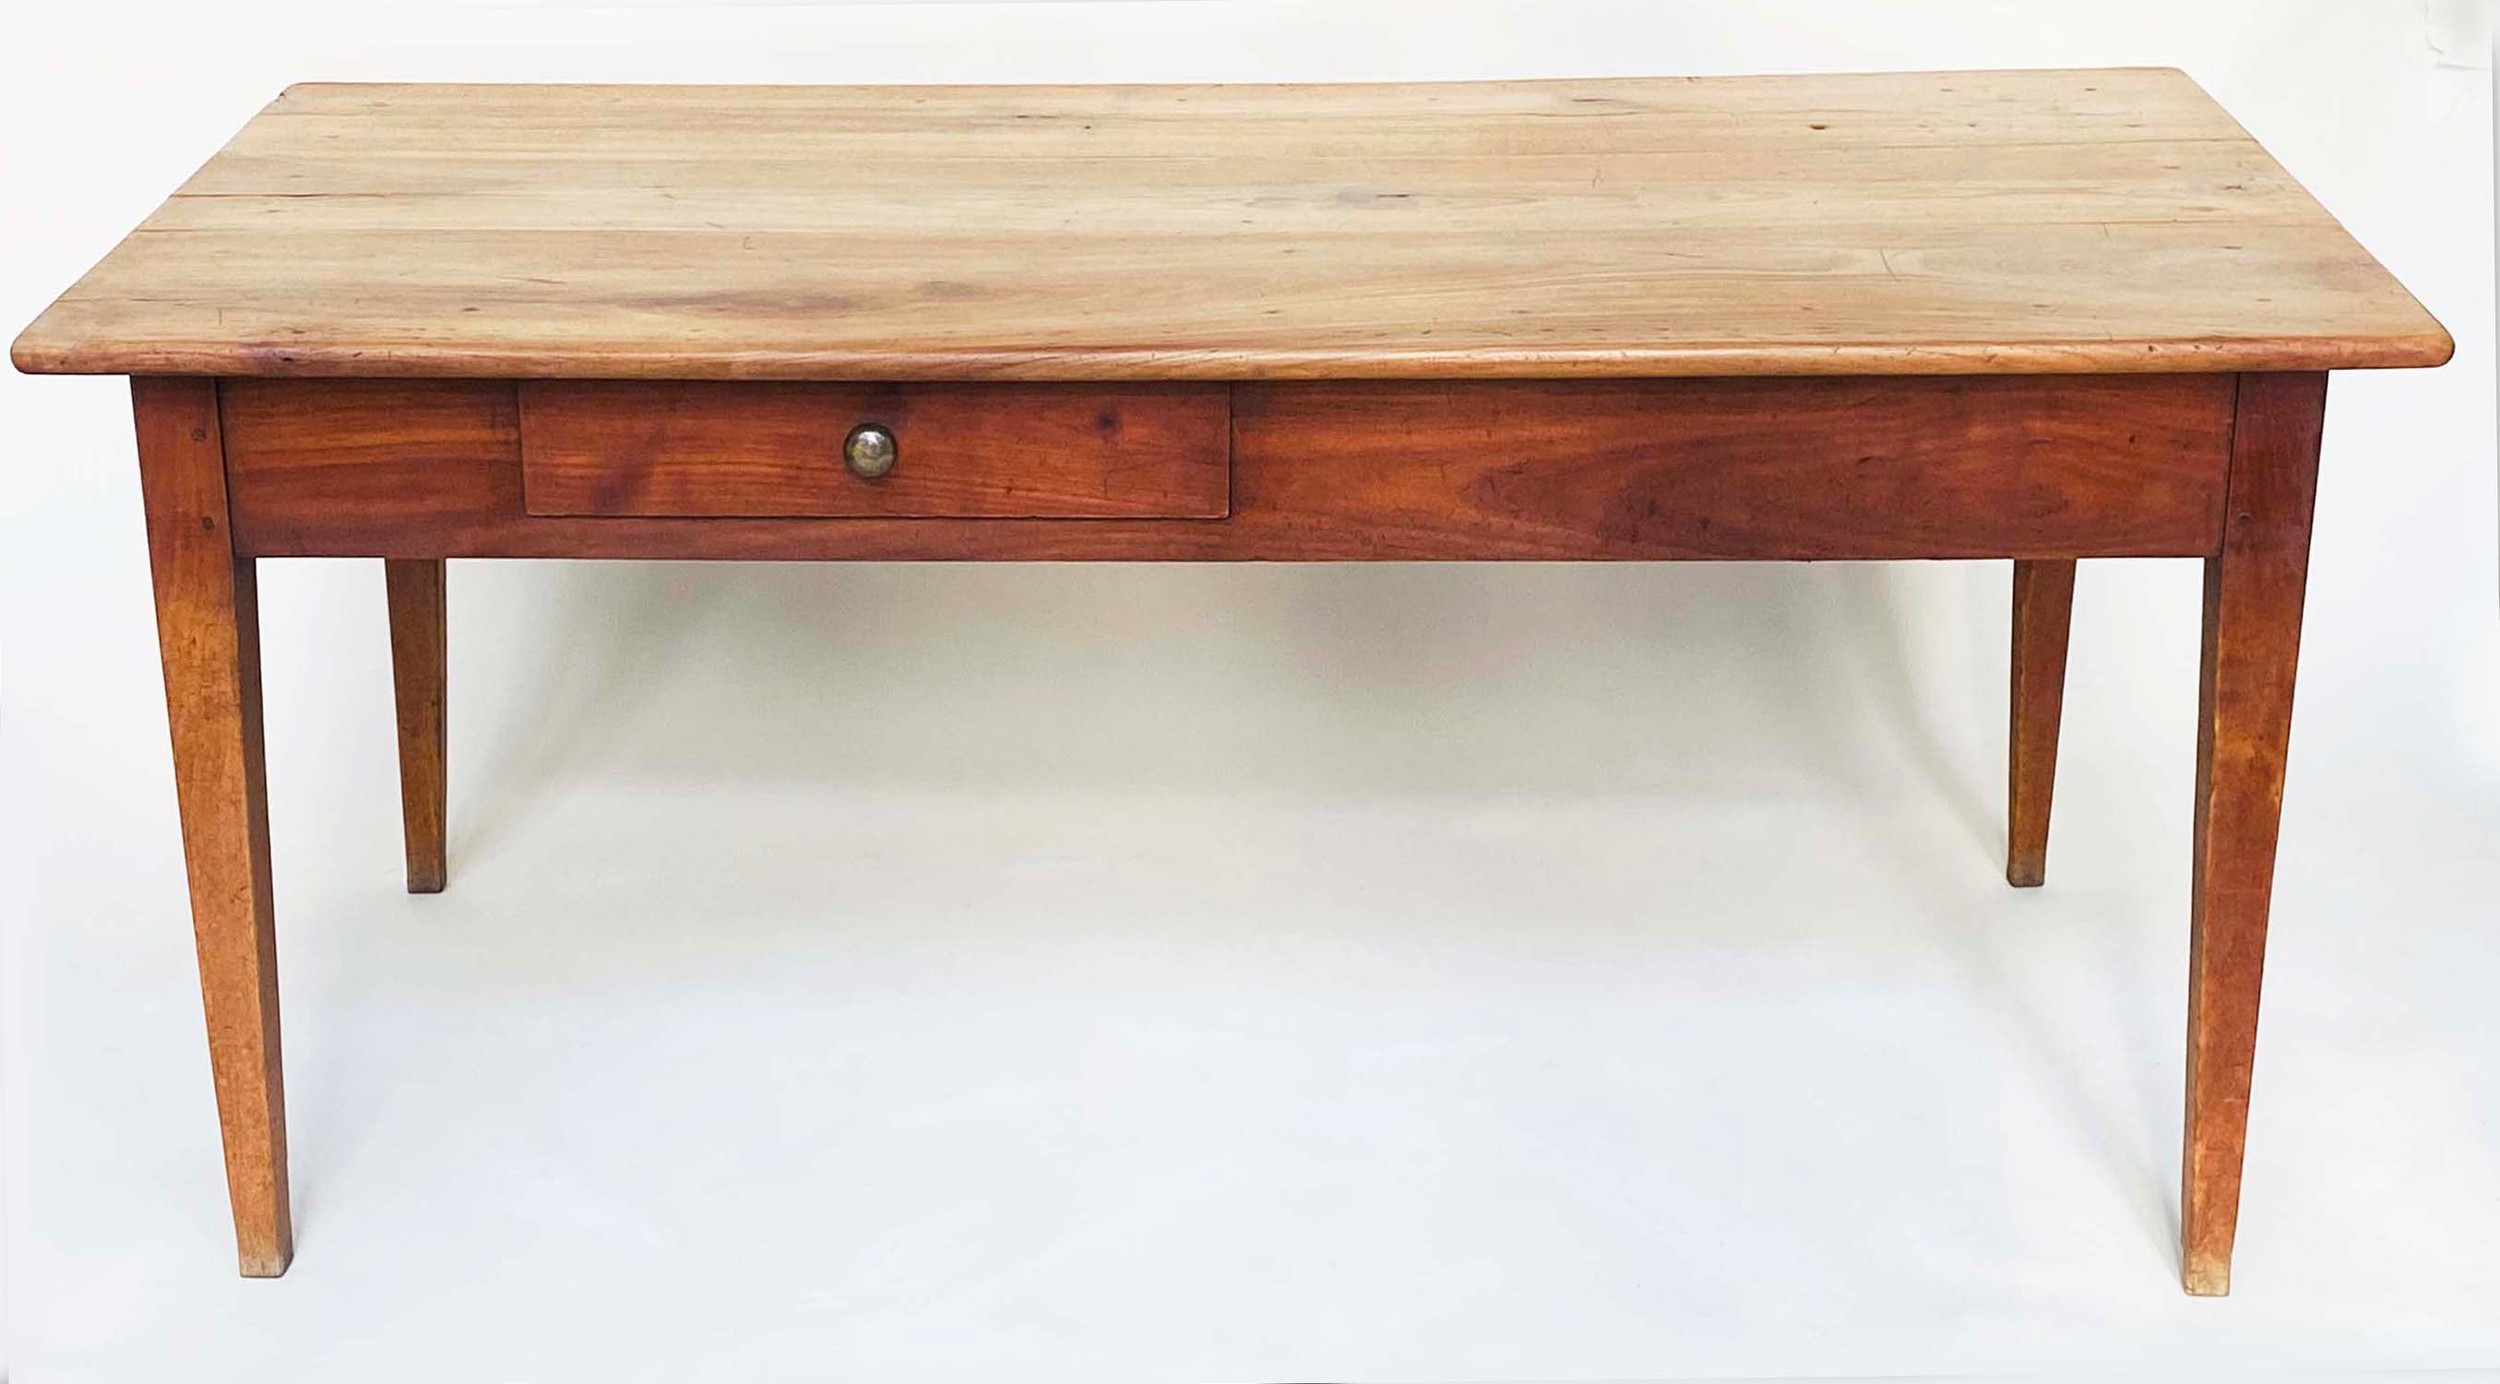 FARMHOUSE TABLE, 19th century French cherrywood with planked top opposing frieze drawers and